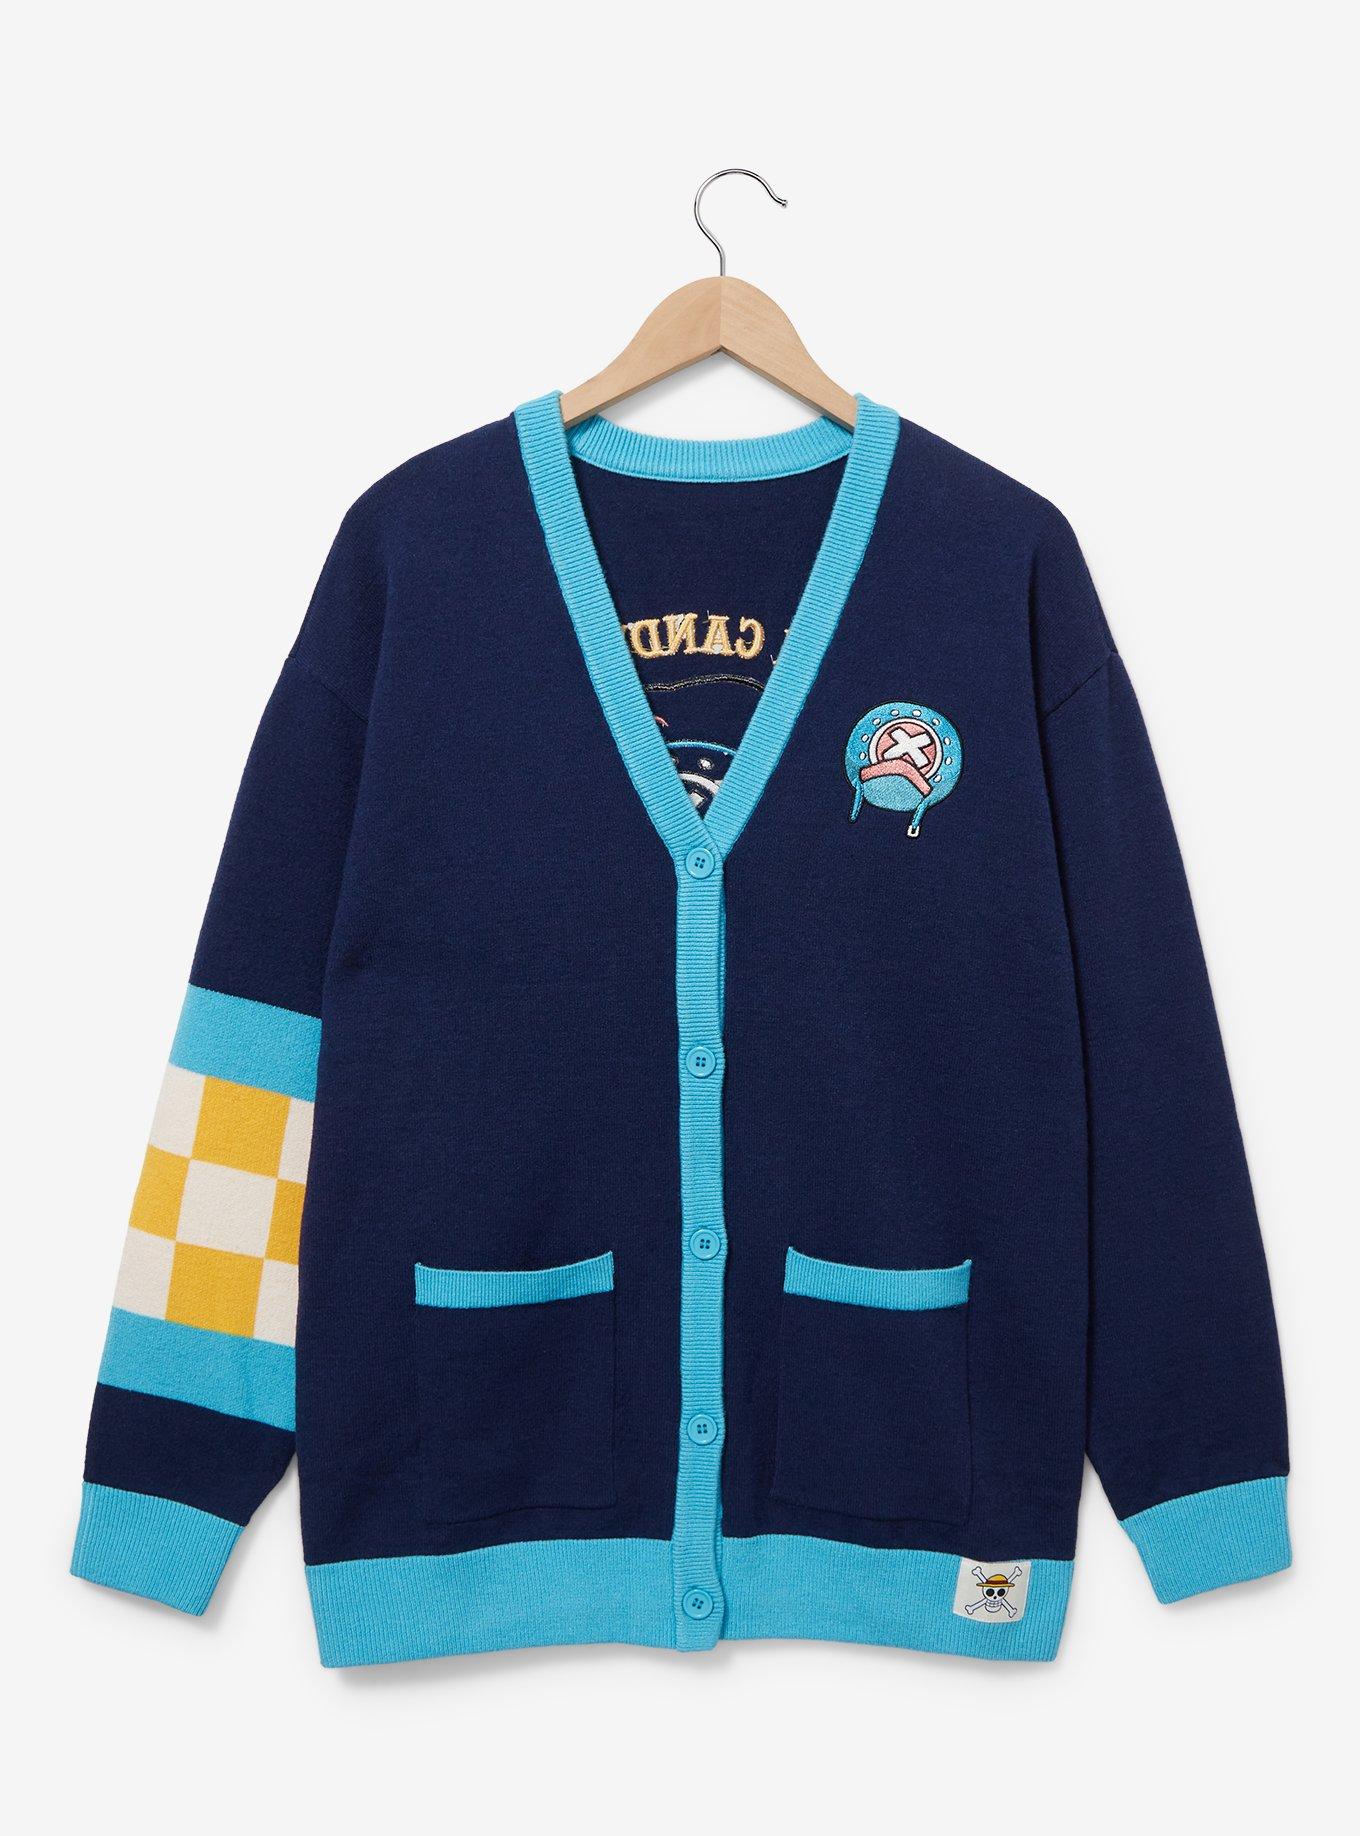 One Piece Chopper Cotton Candy Women's Cardigan — BoxLunch Exclusive, NAVY, hi-res